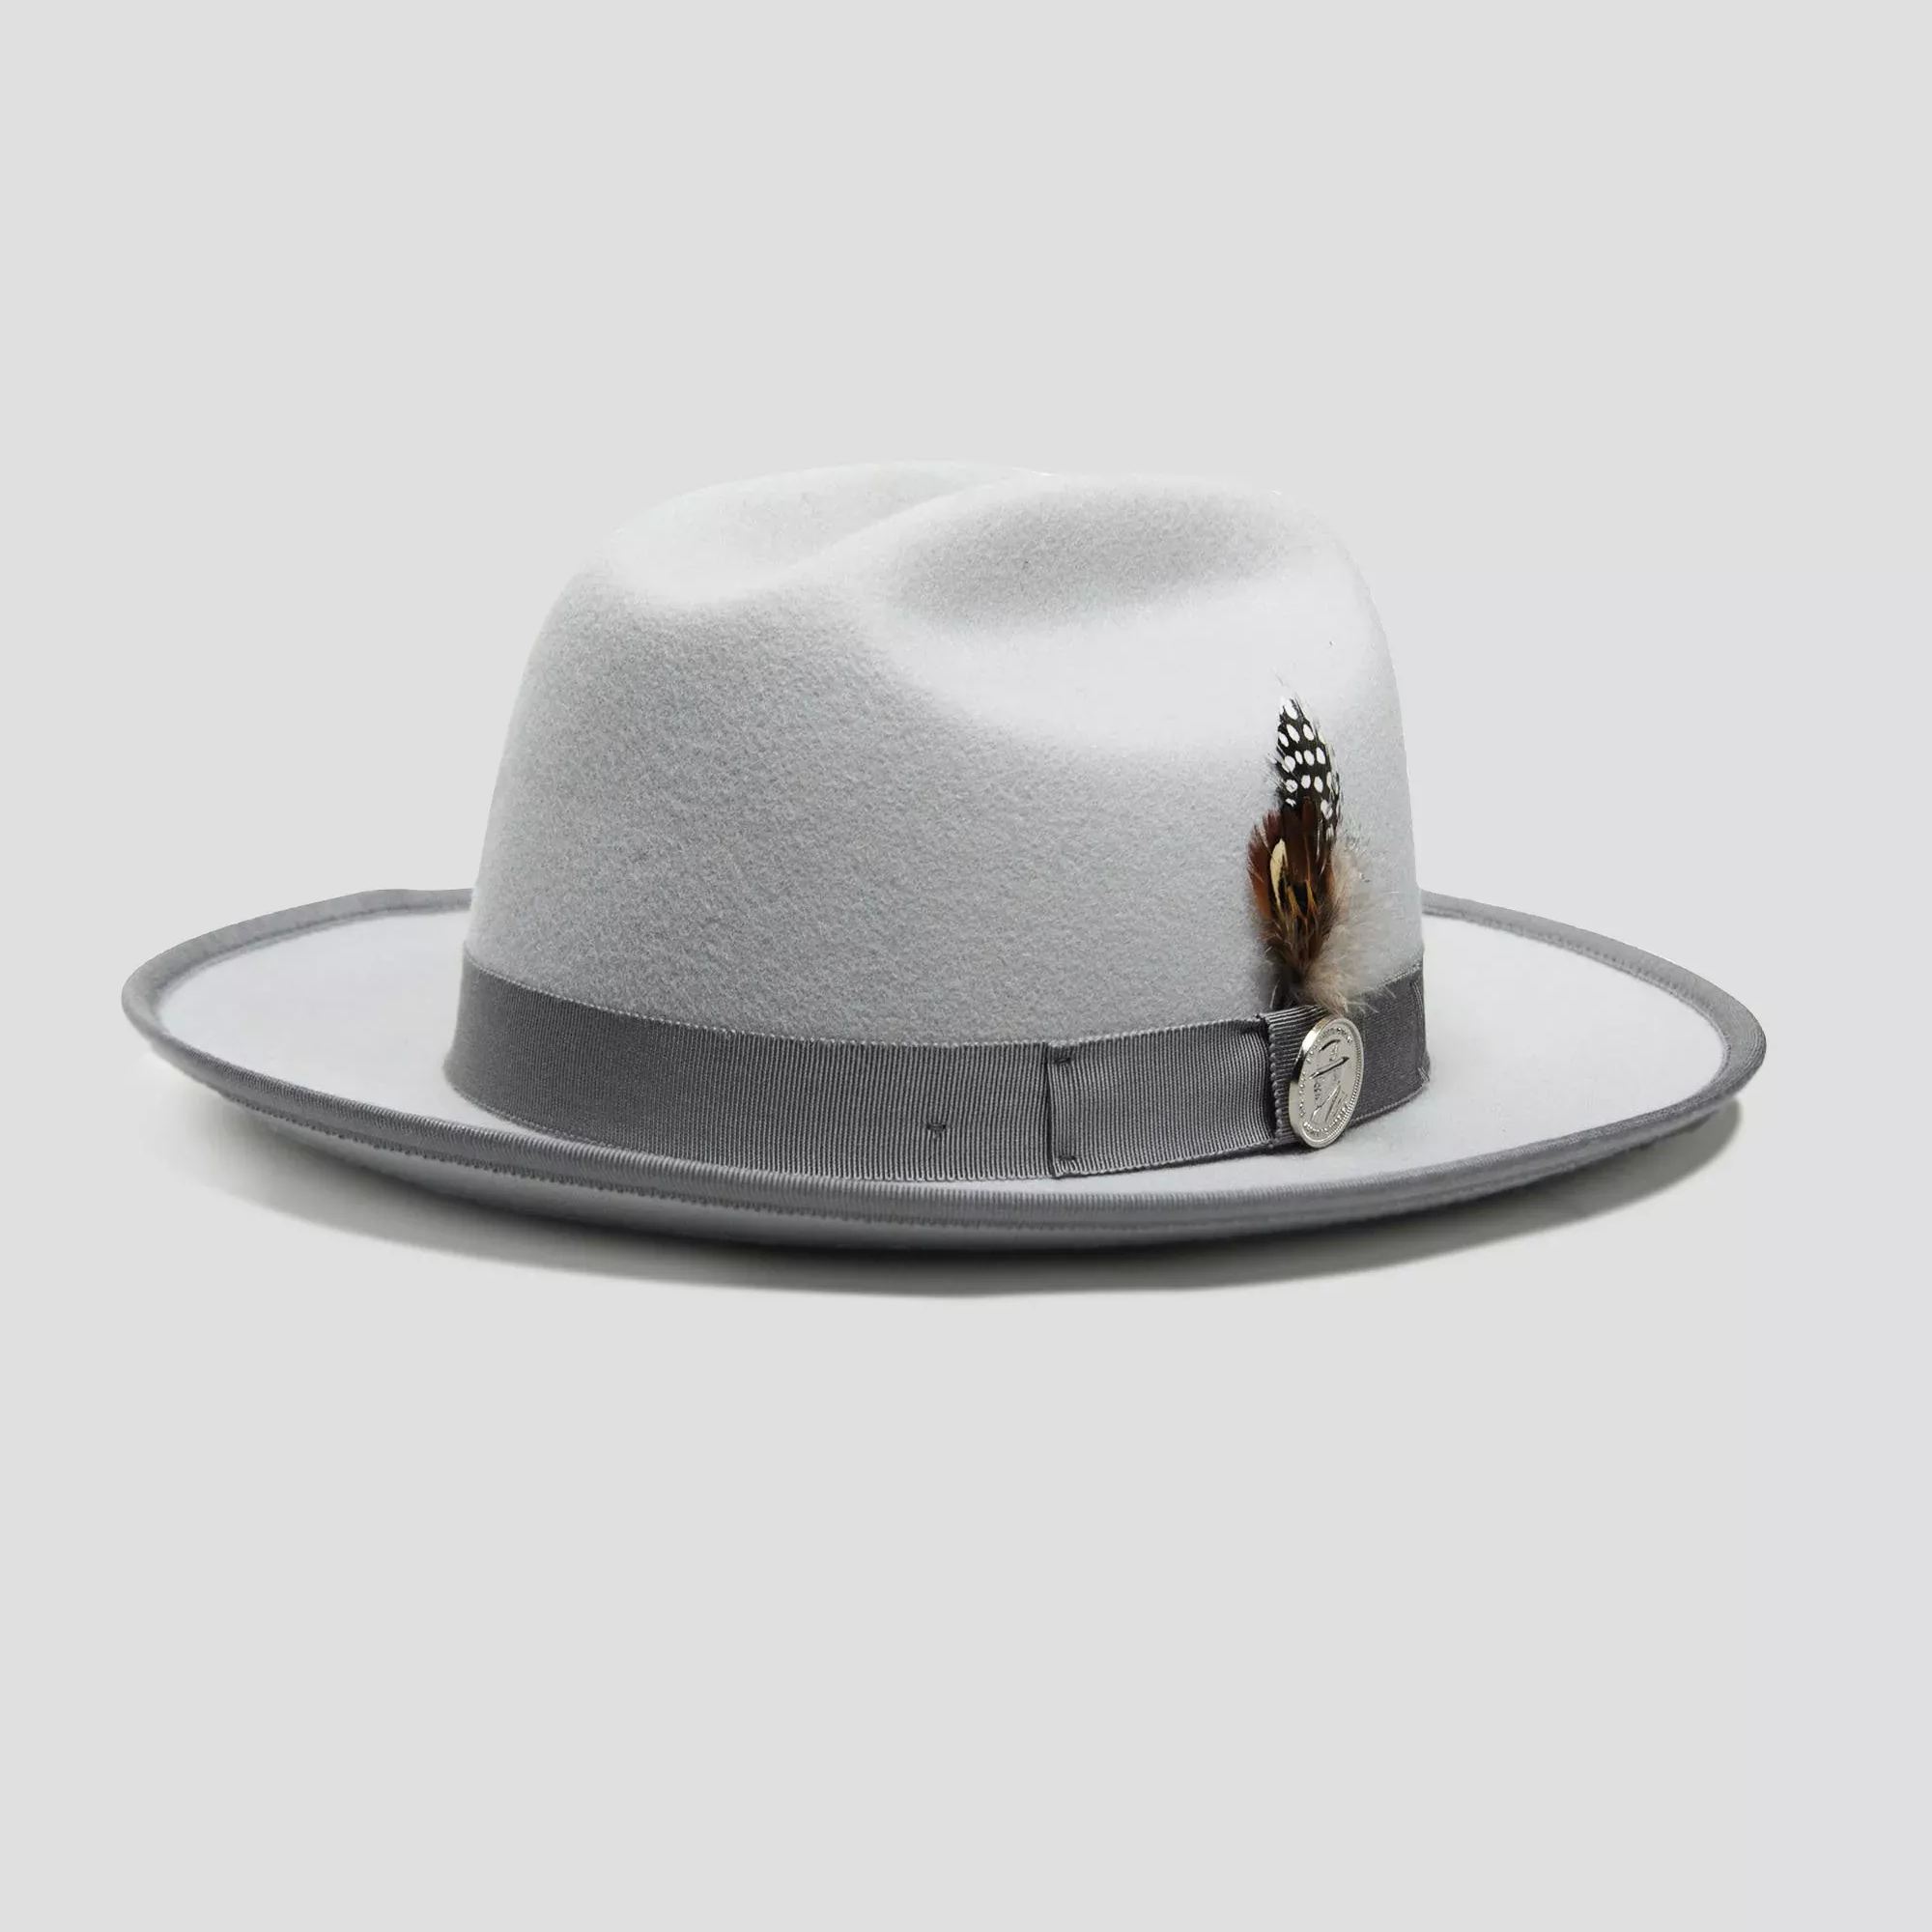 Miller Ranch Fedora - Platinum[Fast shipping and box packing]